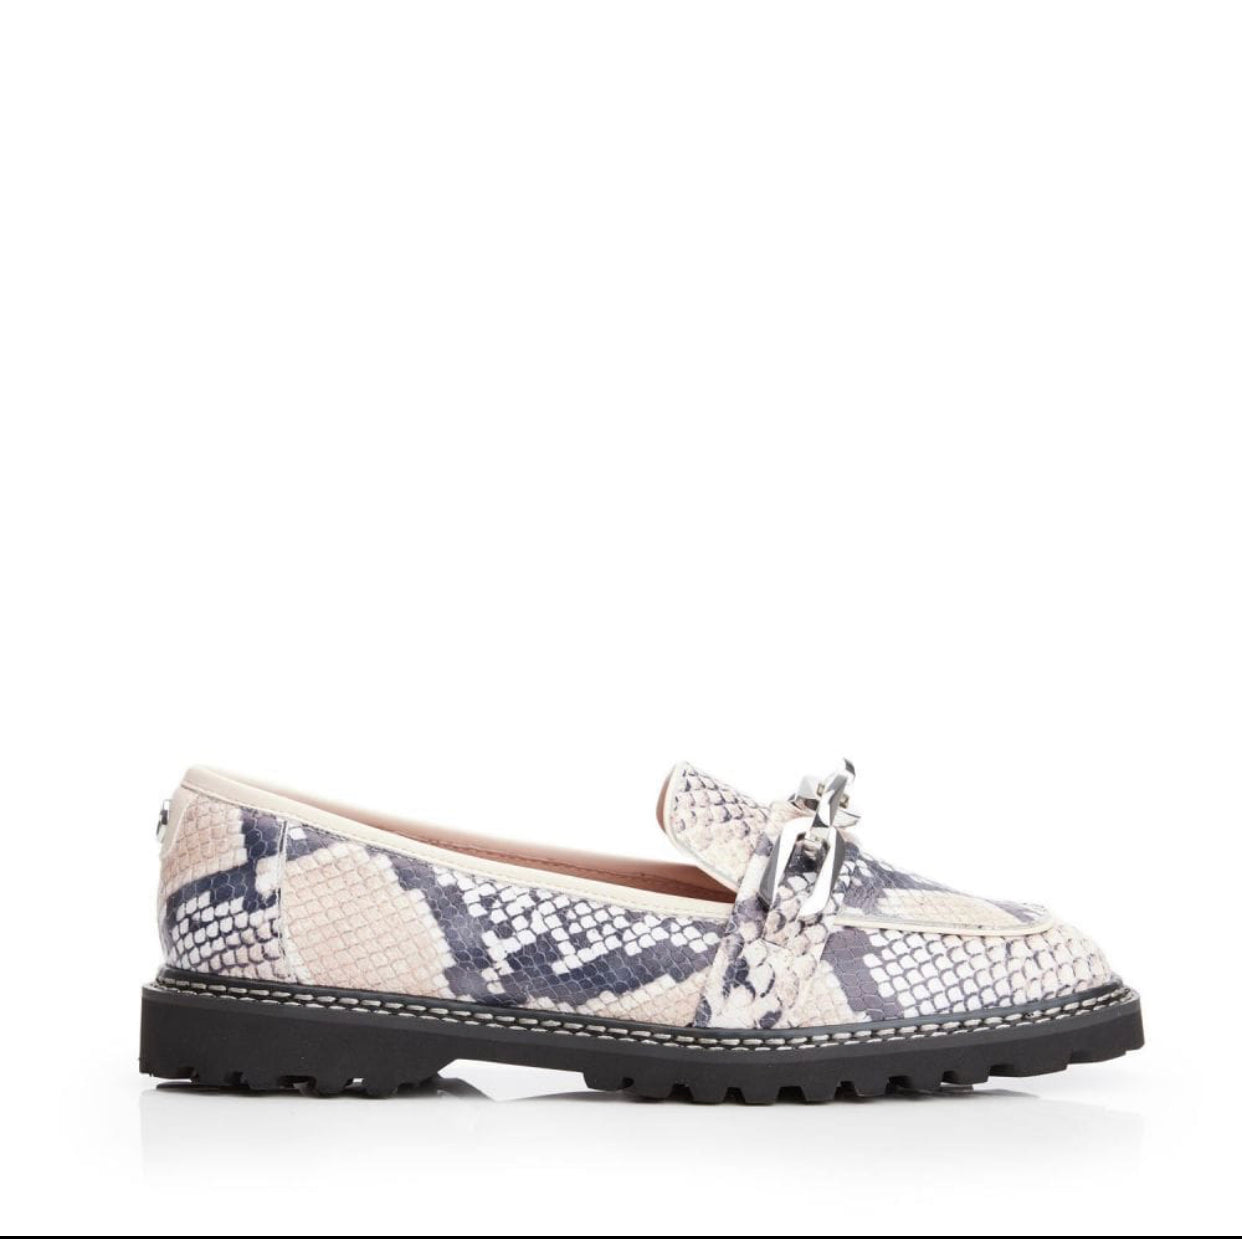 MODA IN PELLE - FURLA NATURAL SNAKE PRINT LEATHER LOAFERS